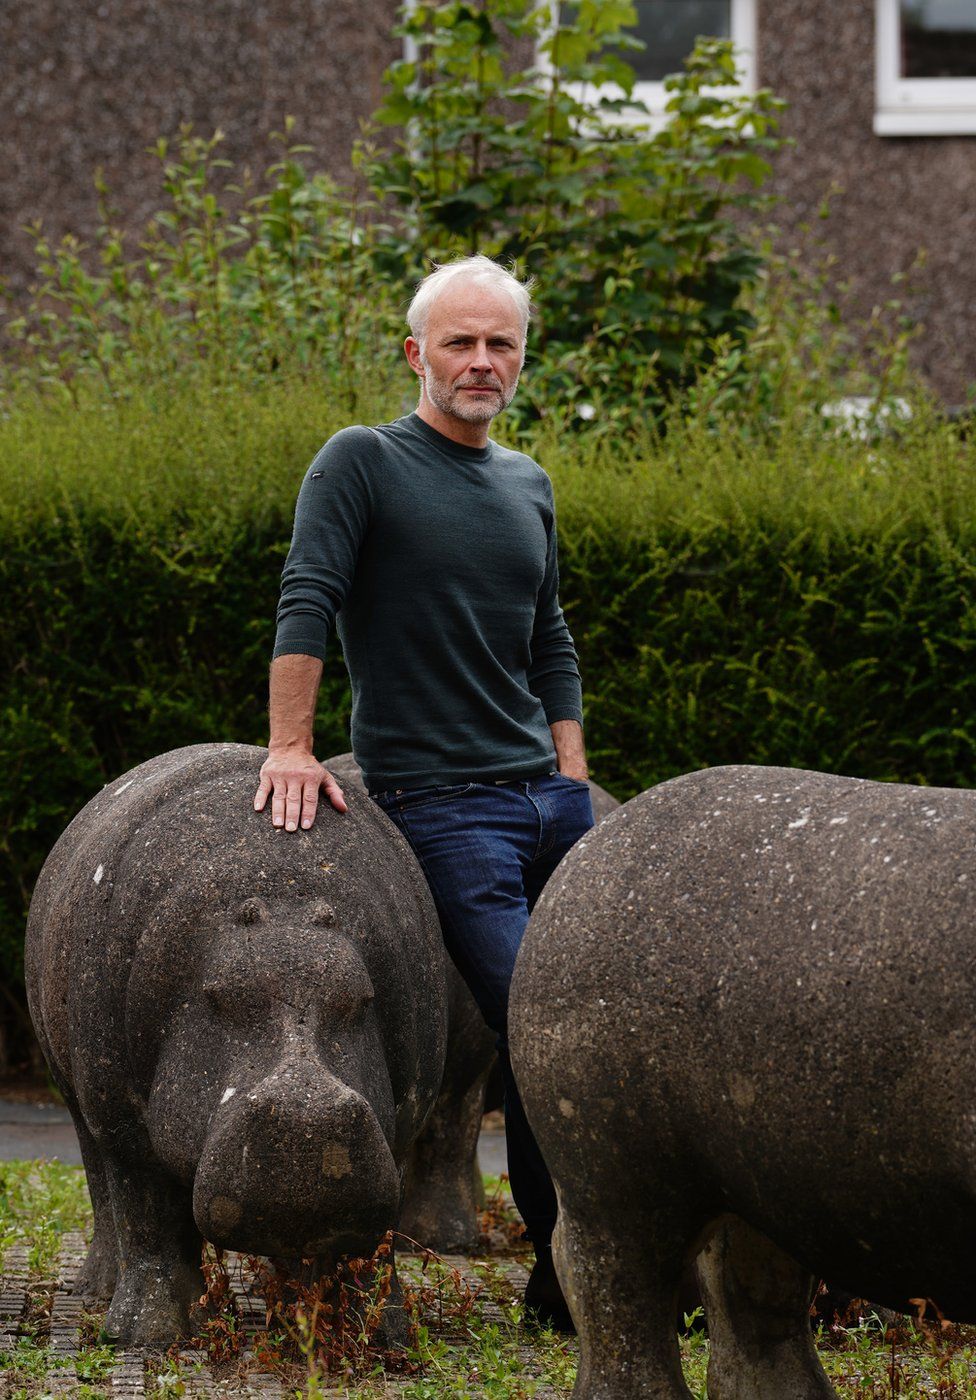 Mark Bonnar in Glenrothes with one of the concrete hippos made by his father Stan in the 70s Mark Bonnar in Glenrothes with one of the concrete hippos made by his father Stan in the 70s.